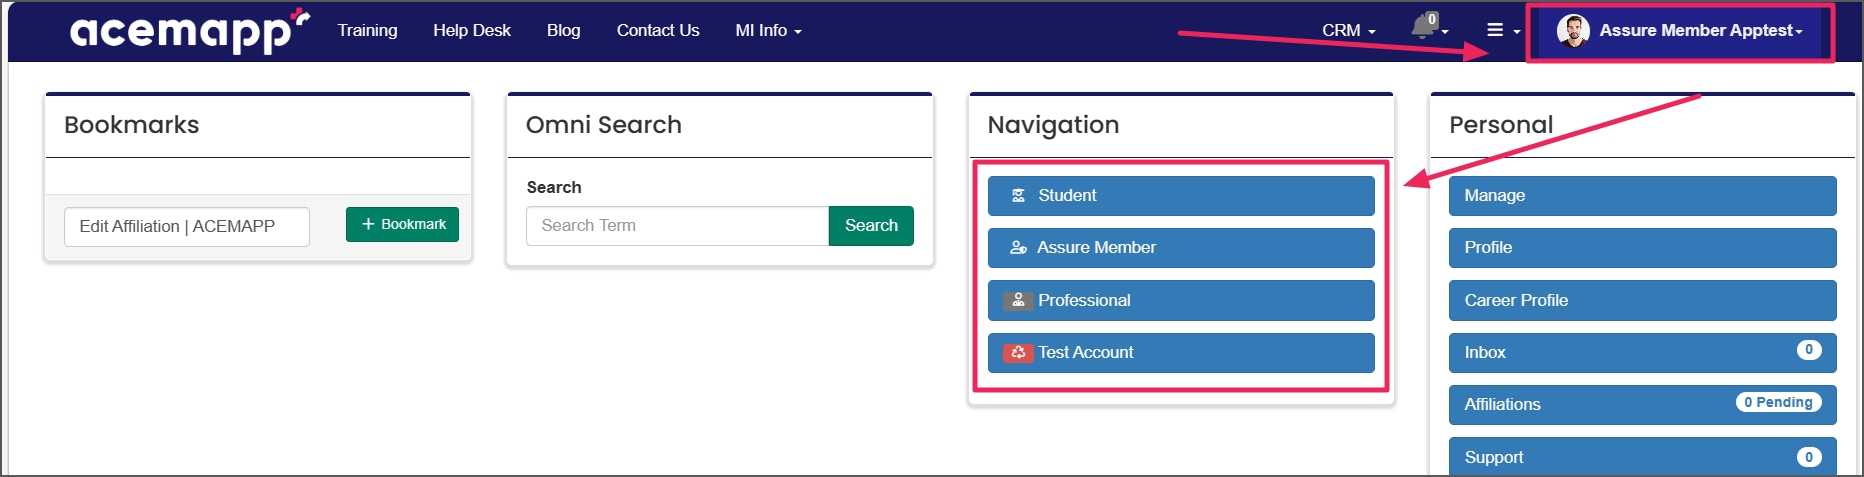 image shows to click member name from top right and navigation table